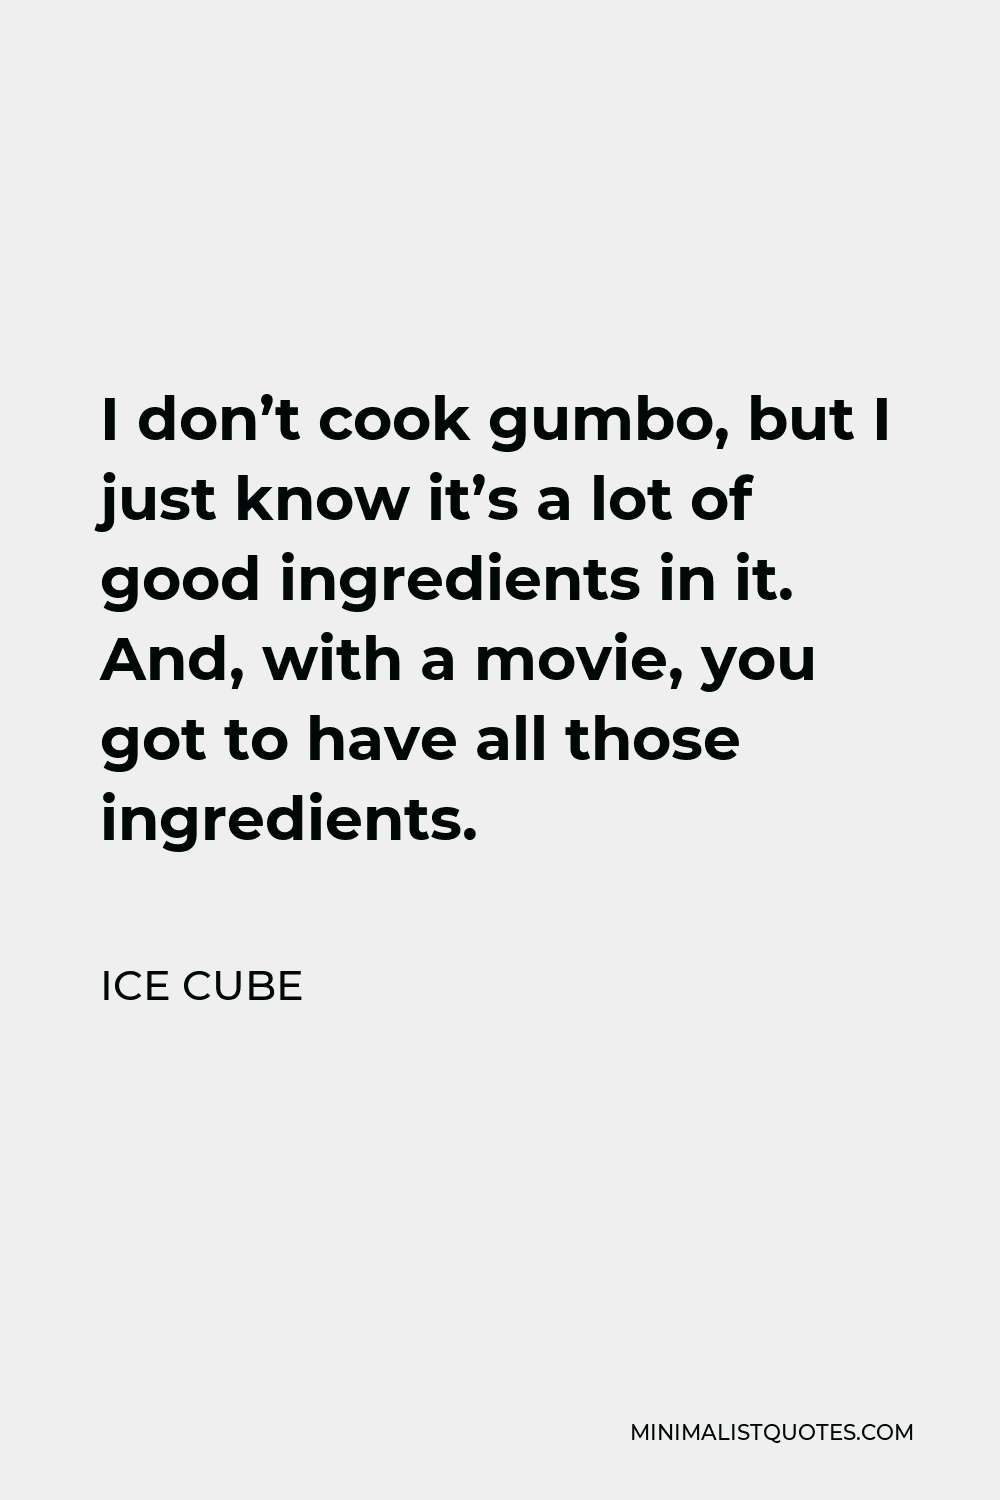 Ice Cube Quote - I don’t cook gumbo, but I just know it’s a lot of good ingredients in it. And, with a movie, you got to have all those ingredients.